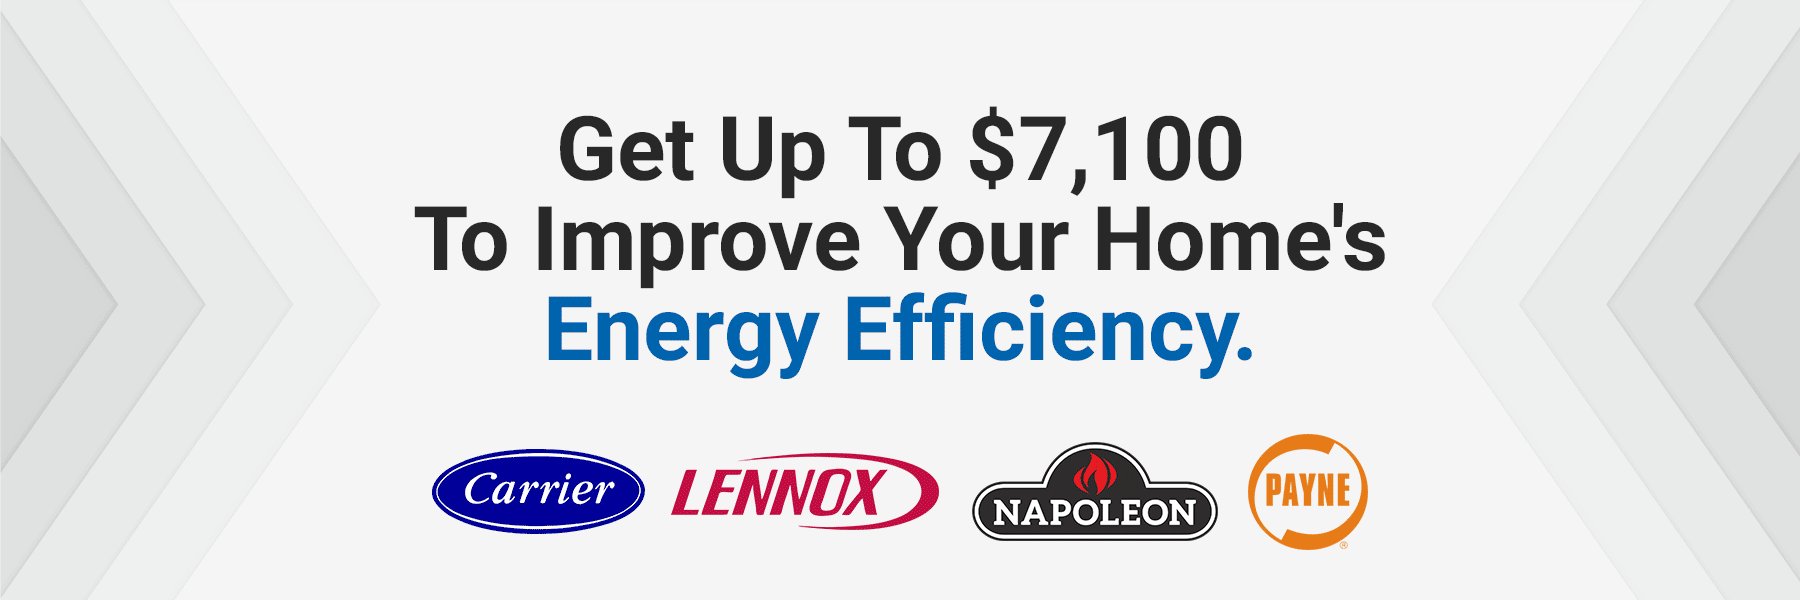 Ontario Lennox EL296E High-efficiency, Two-stage Gas Furnace incentives